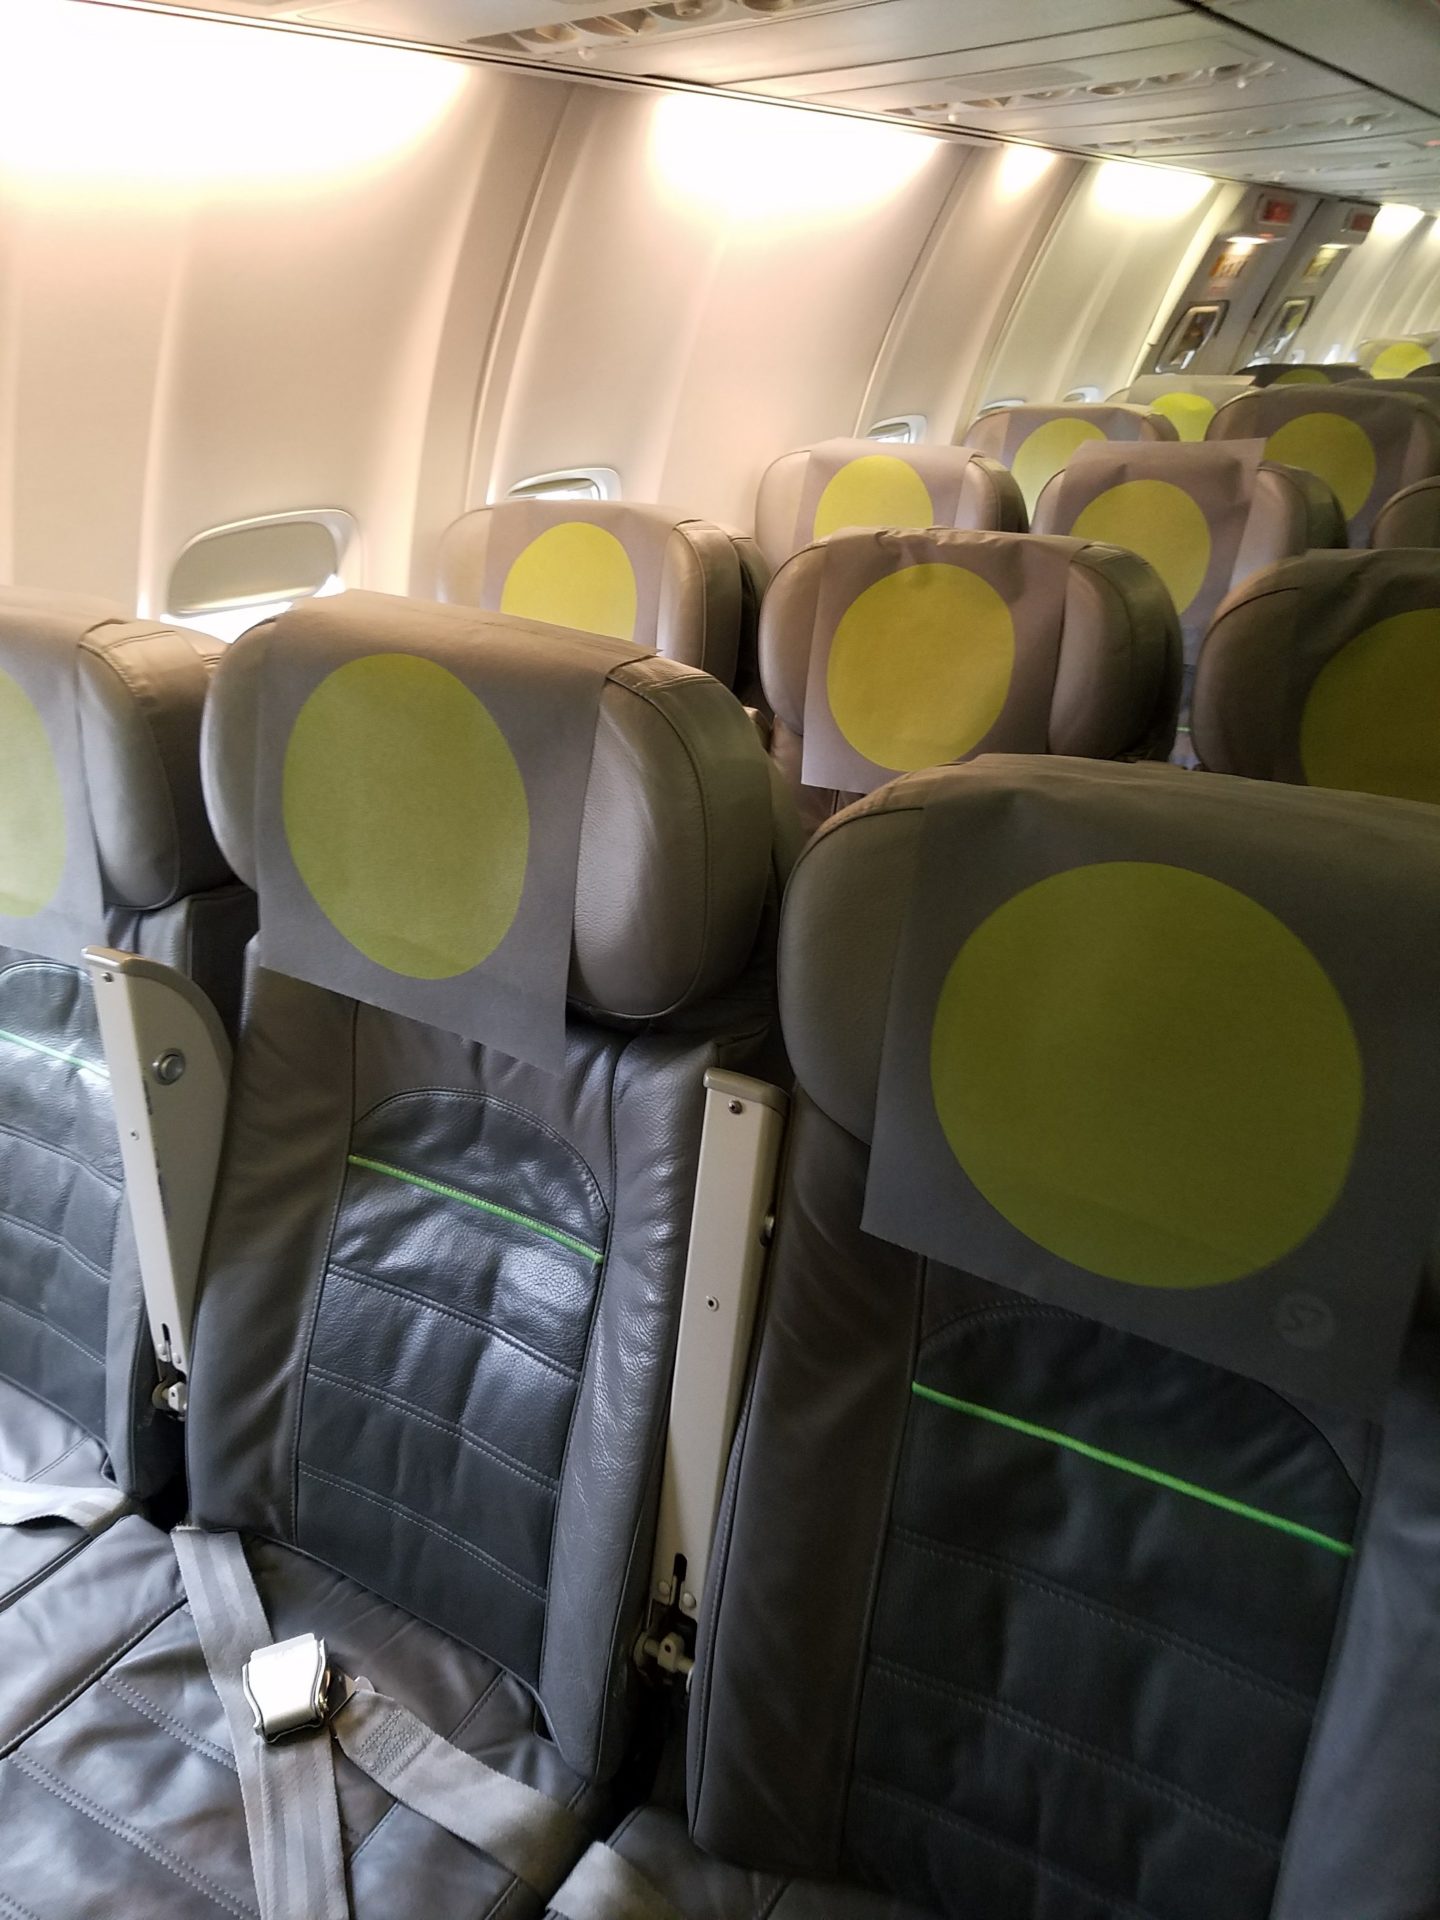 a row of seats with yellow circles on them